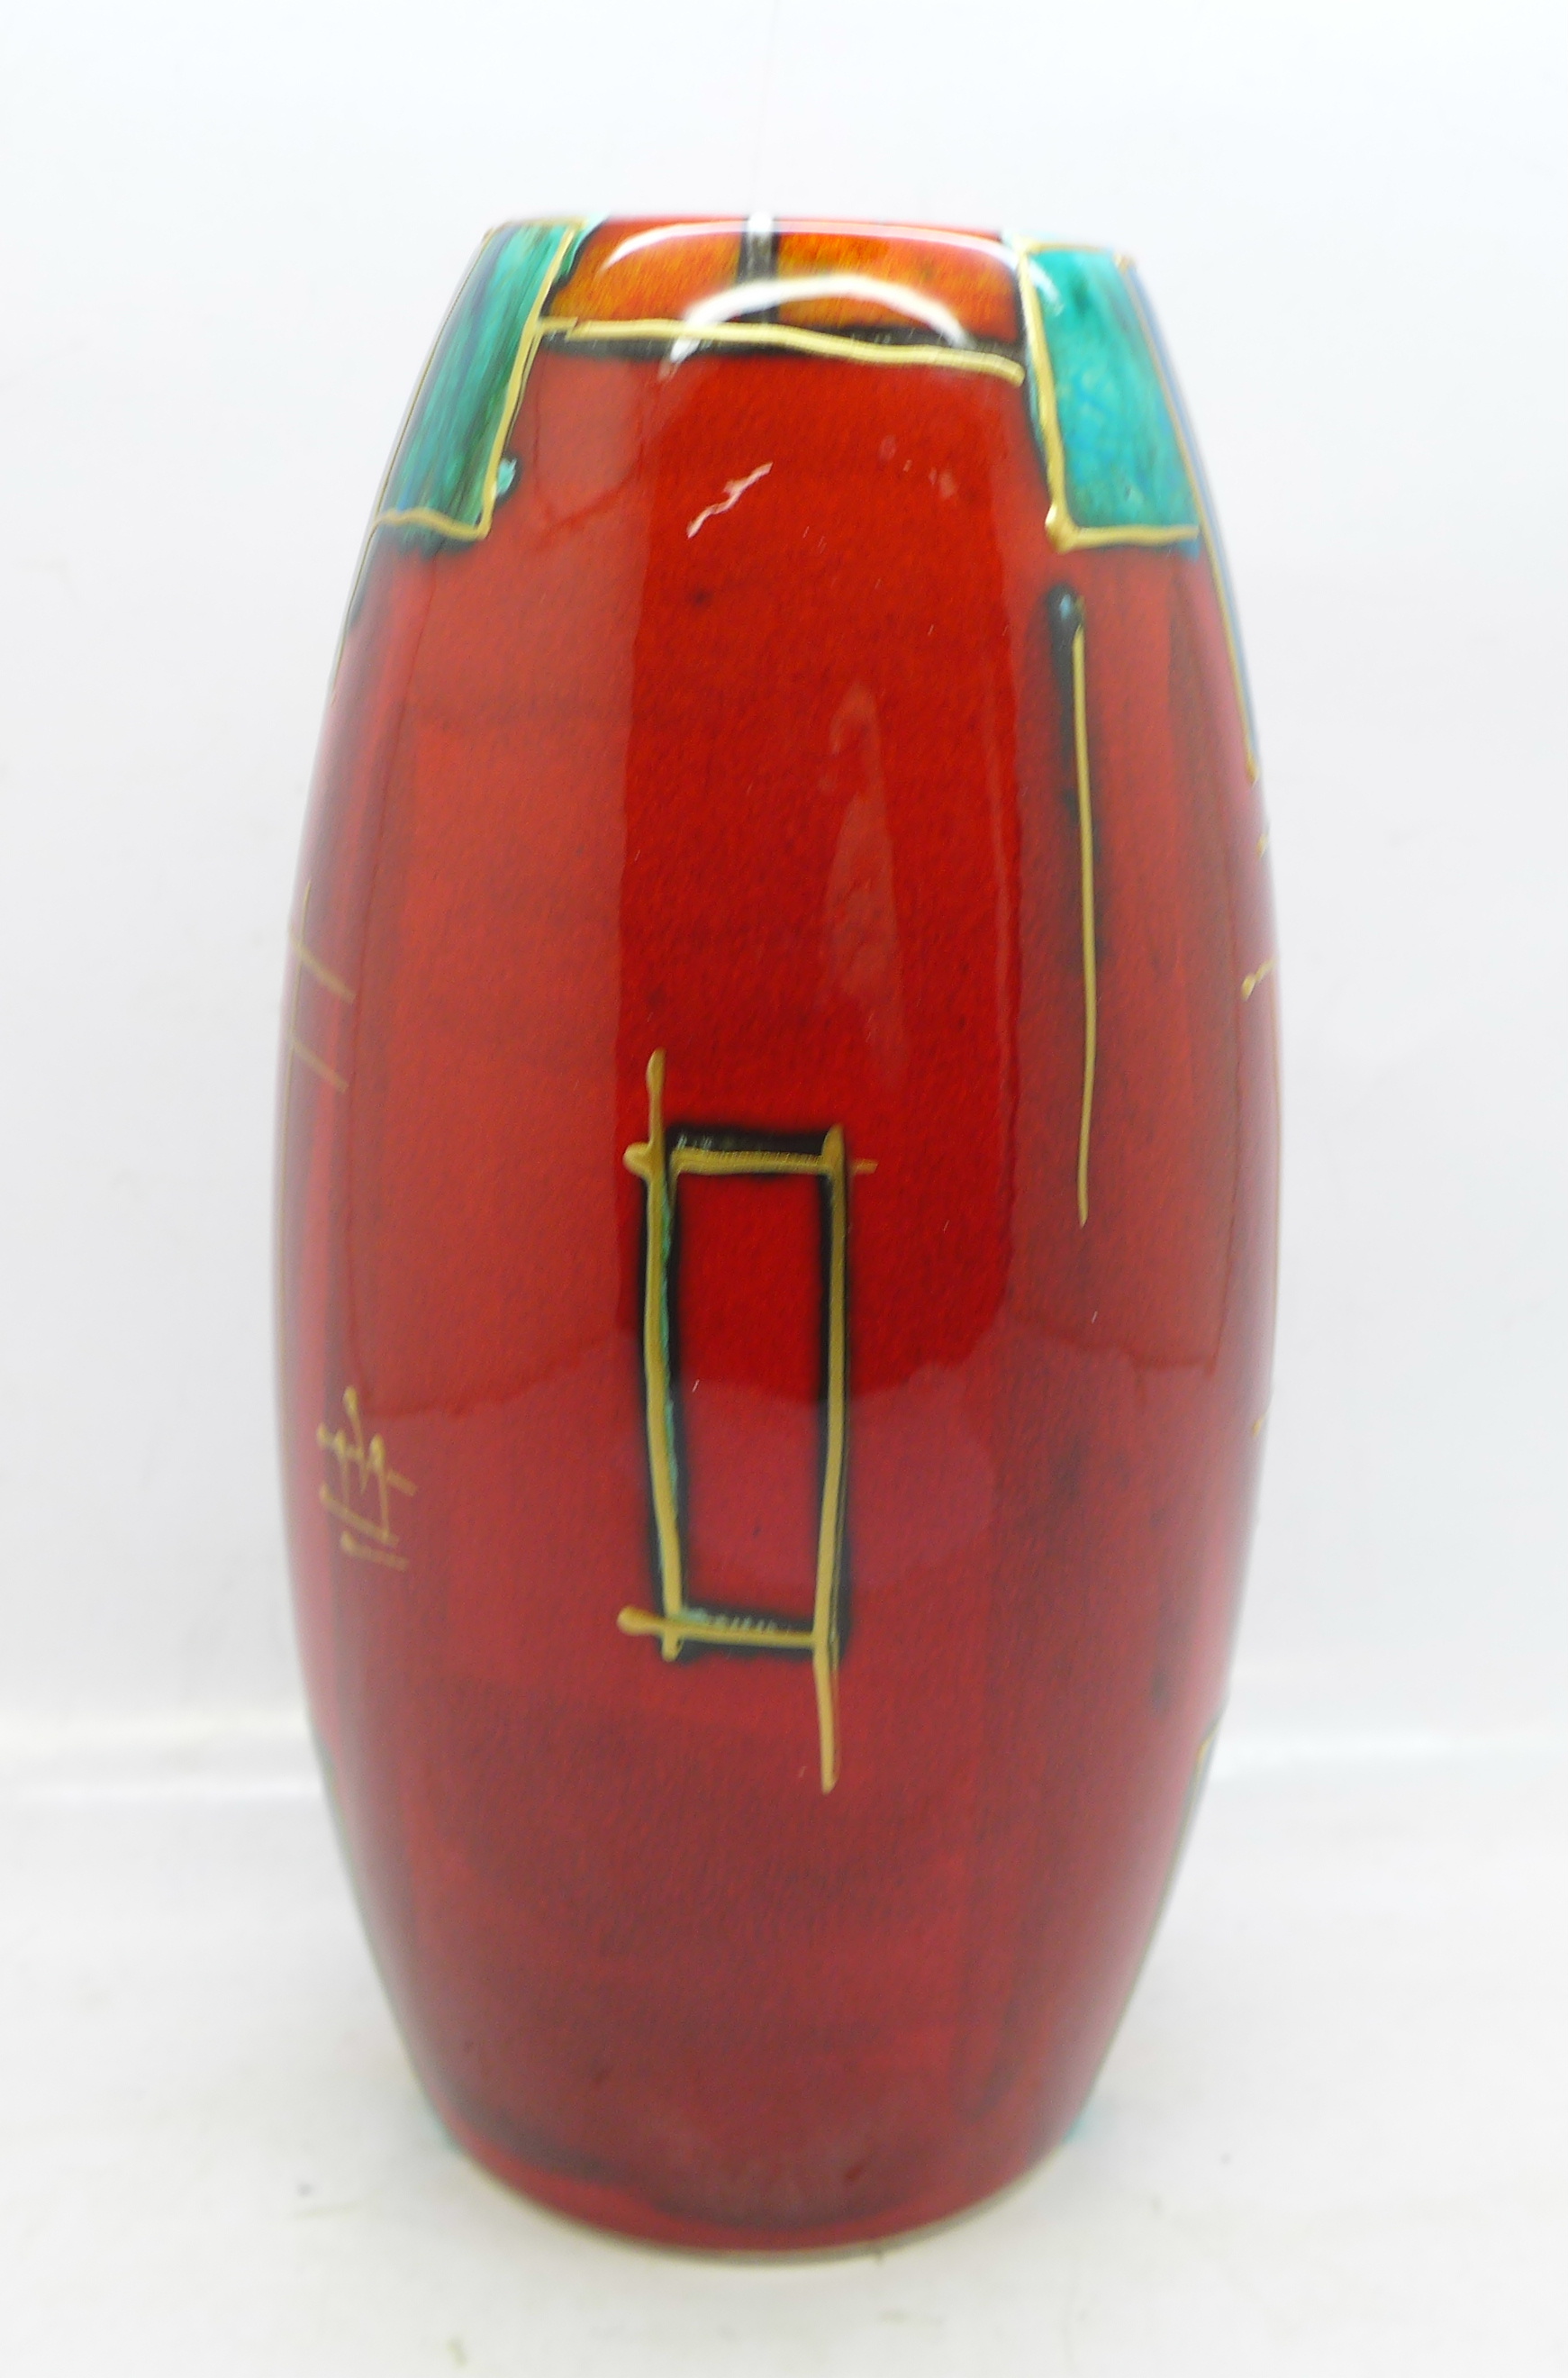 An Anita Harris Skittle vase, Deco design, 18cm, signed in gold on the base - Image 2 of 4